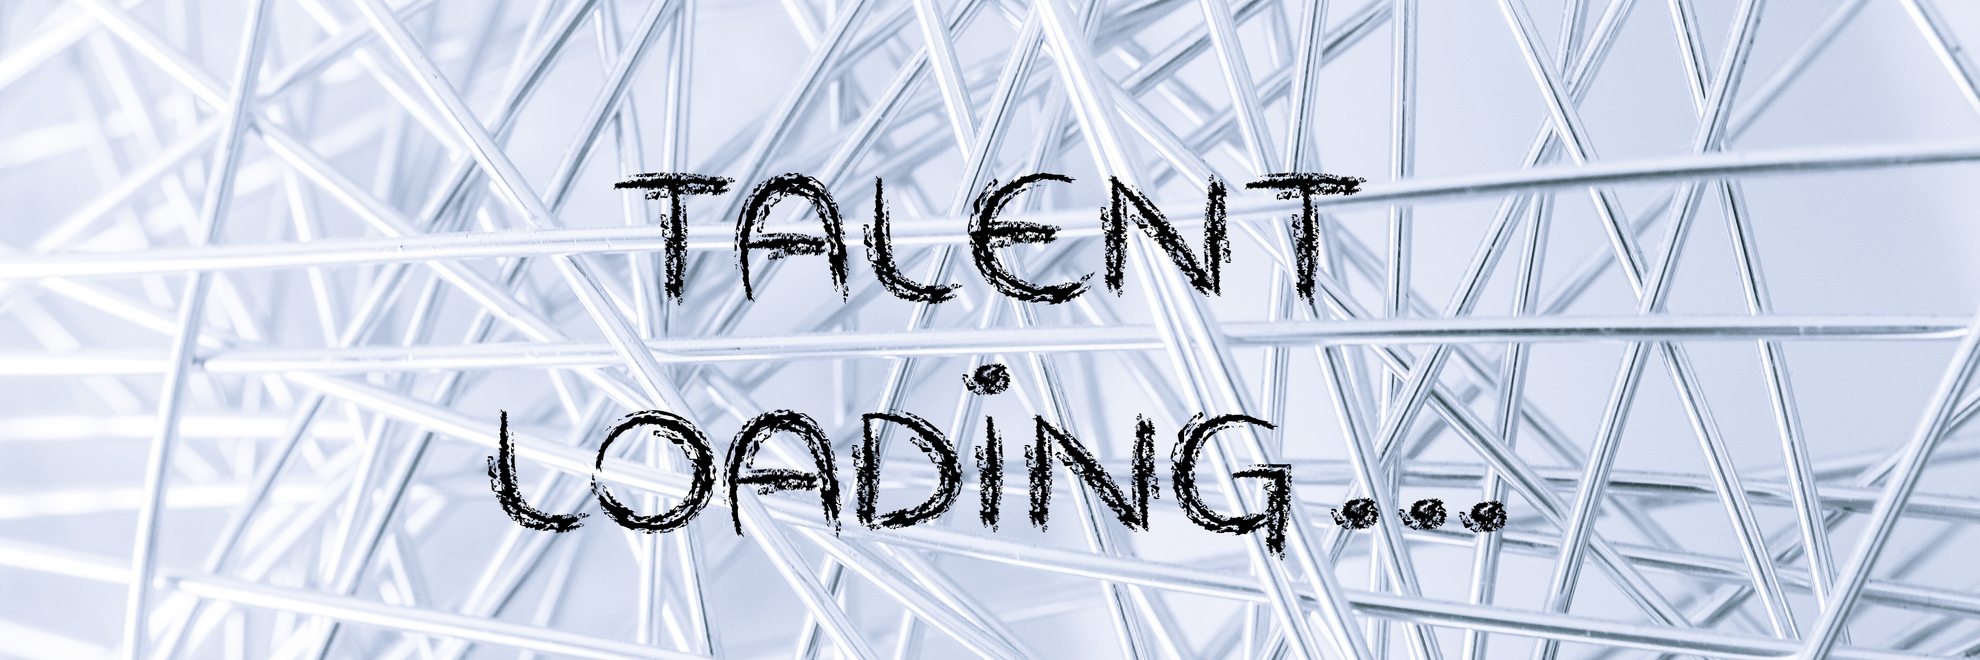 Accelerating Digital Delivery in the War for Talent